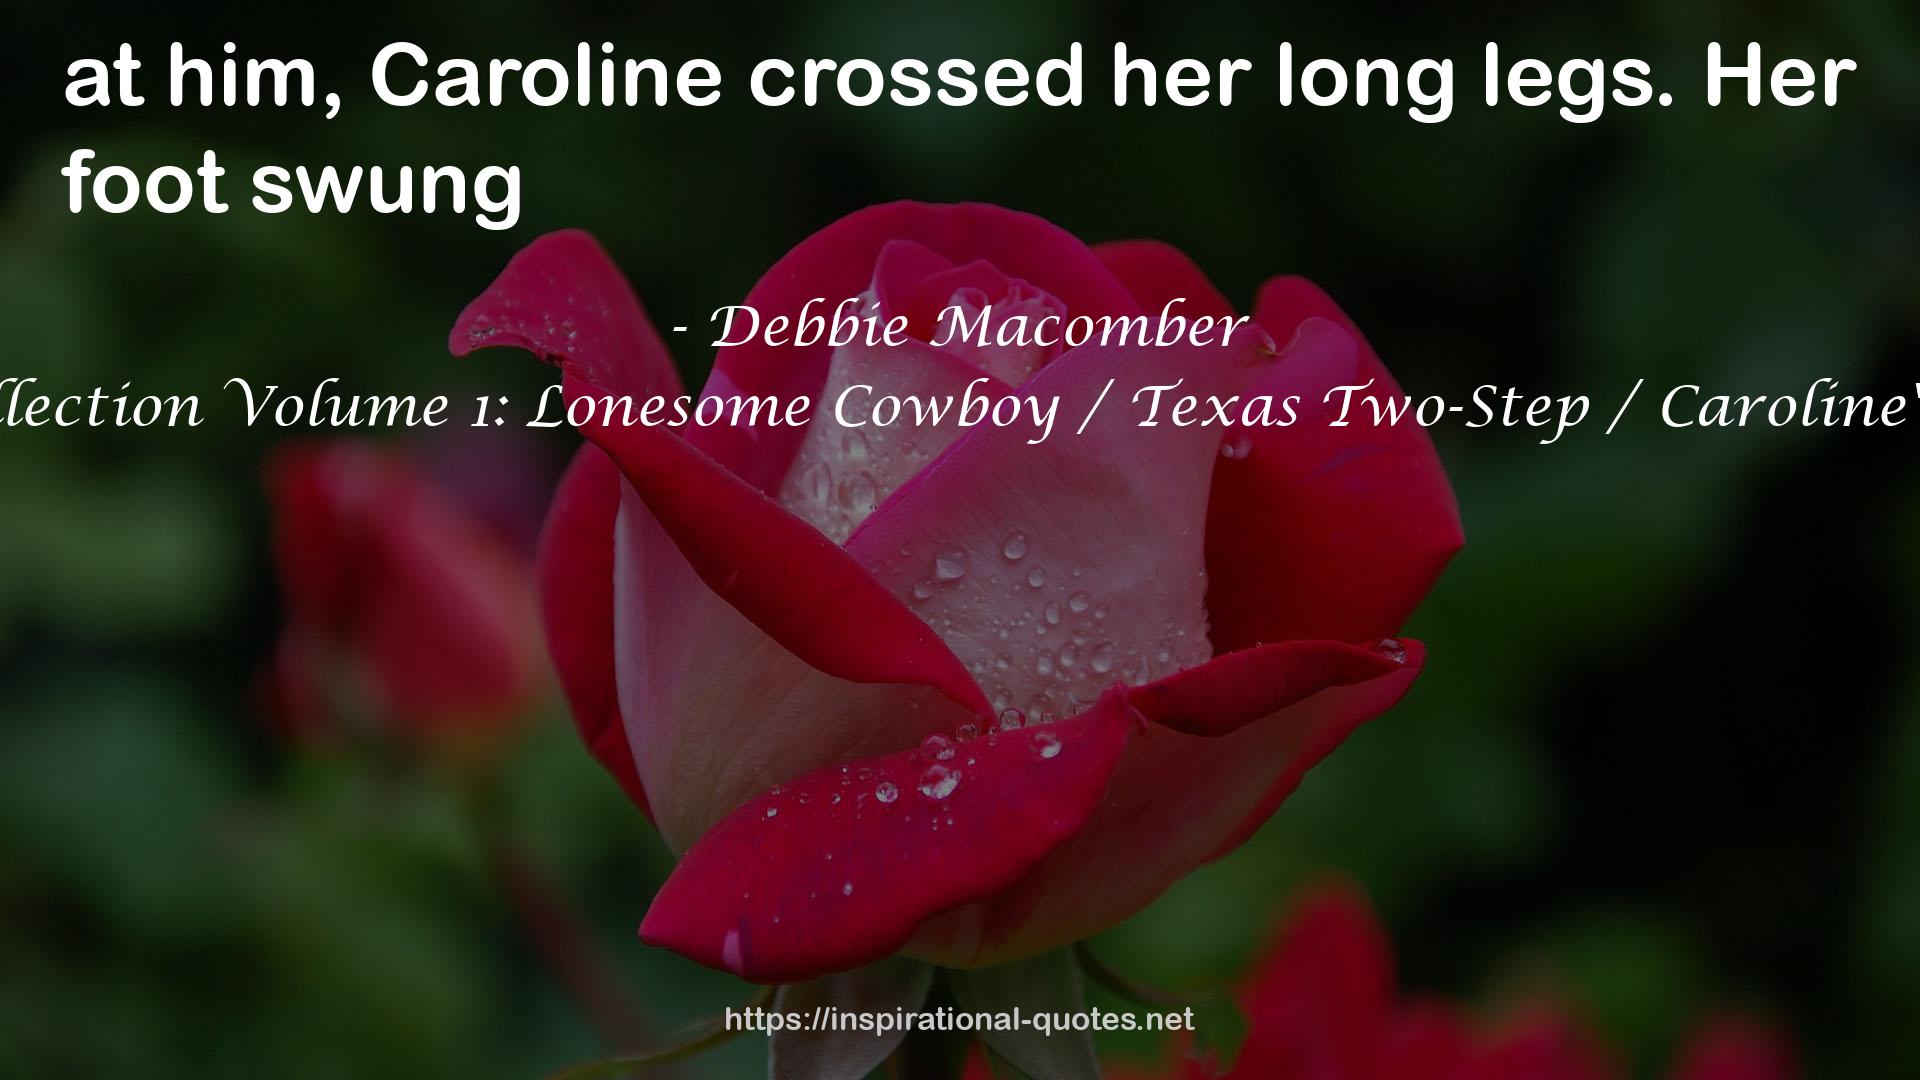 Heart of Texas Collection Volume 1: Lonesome Cowboy / Texas Two-Step / Caroline's Child / Dr. Texas QUOTES